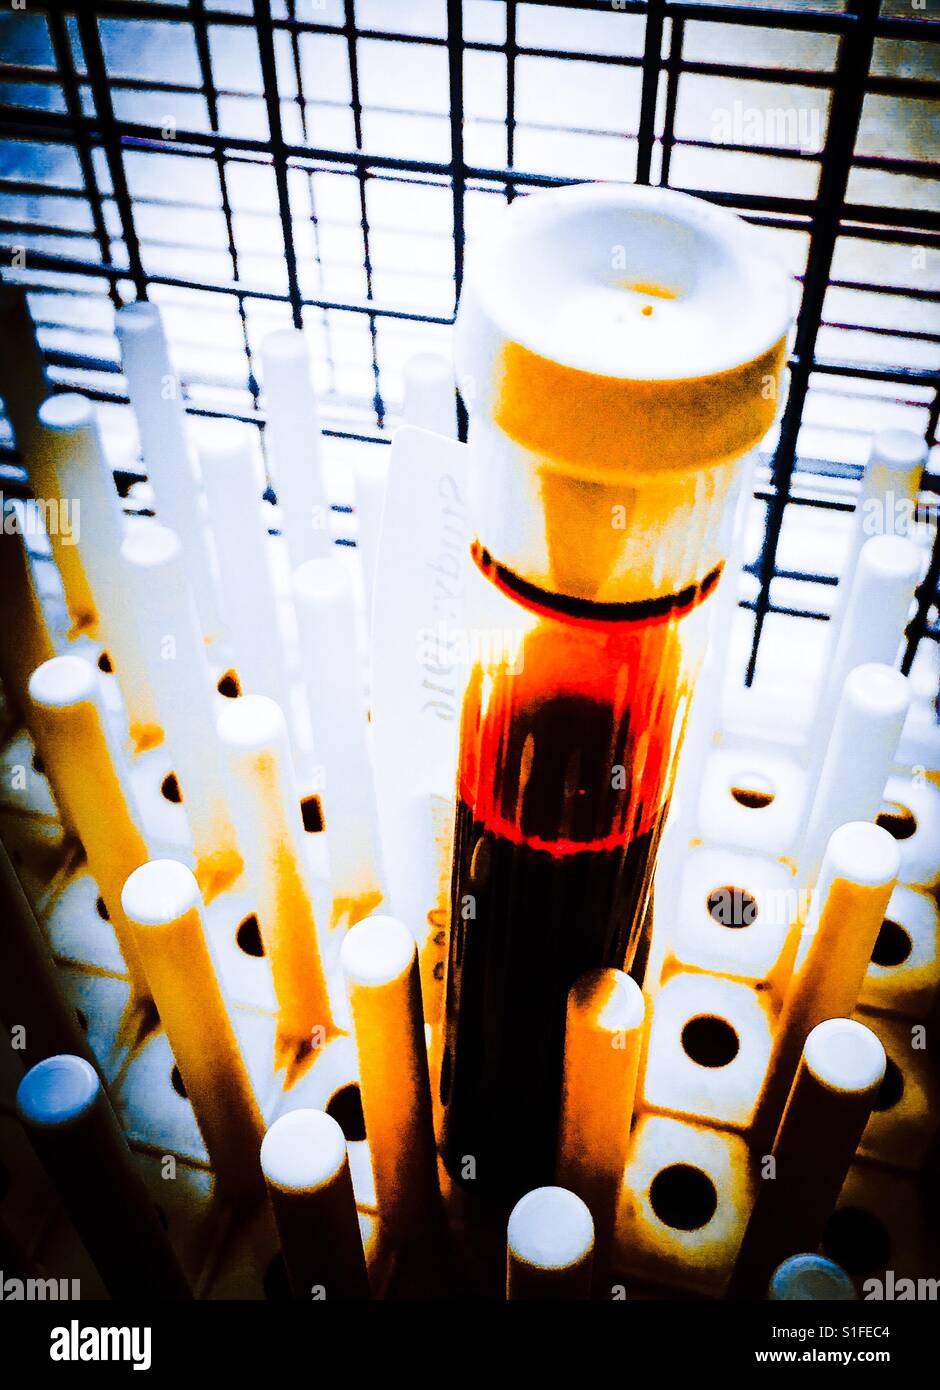 Blood in tube on laboratory rack Stock Photo